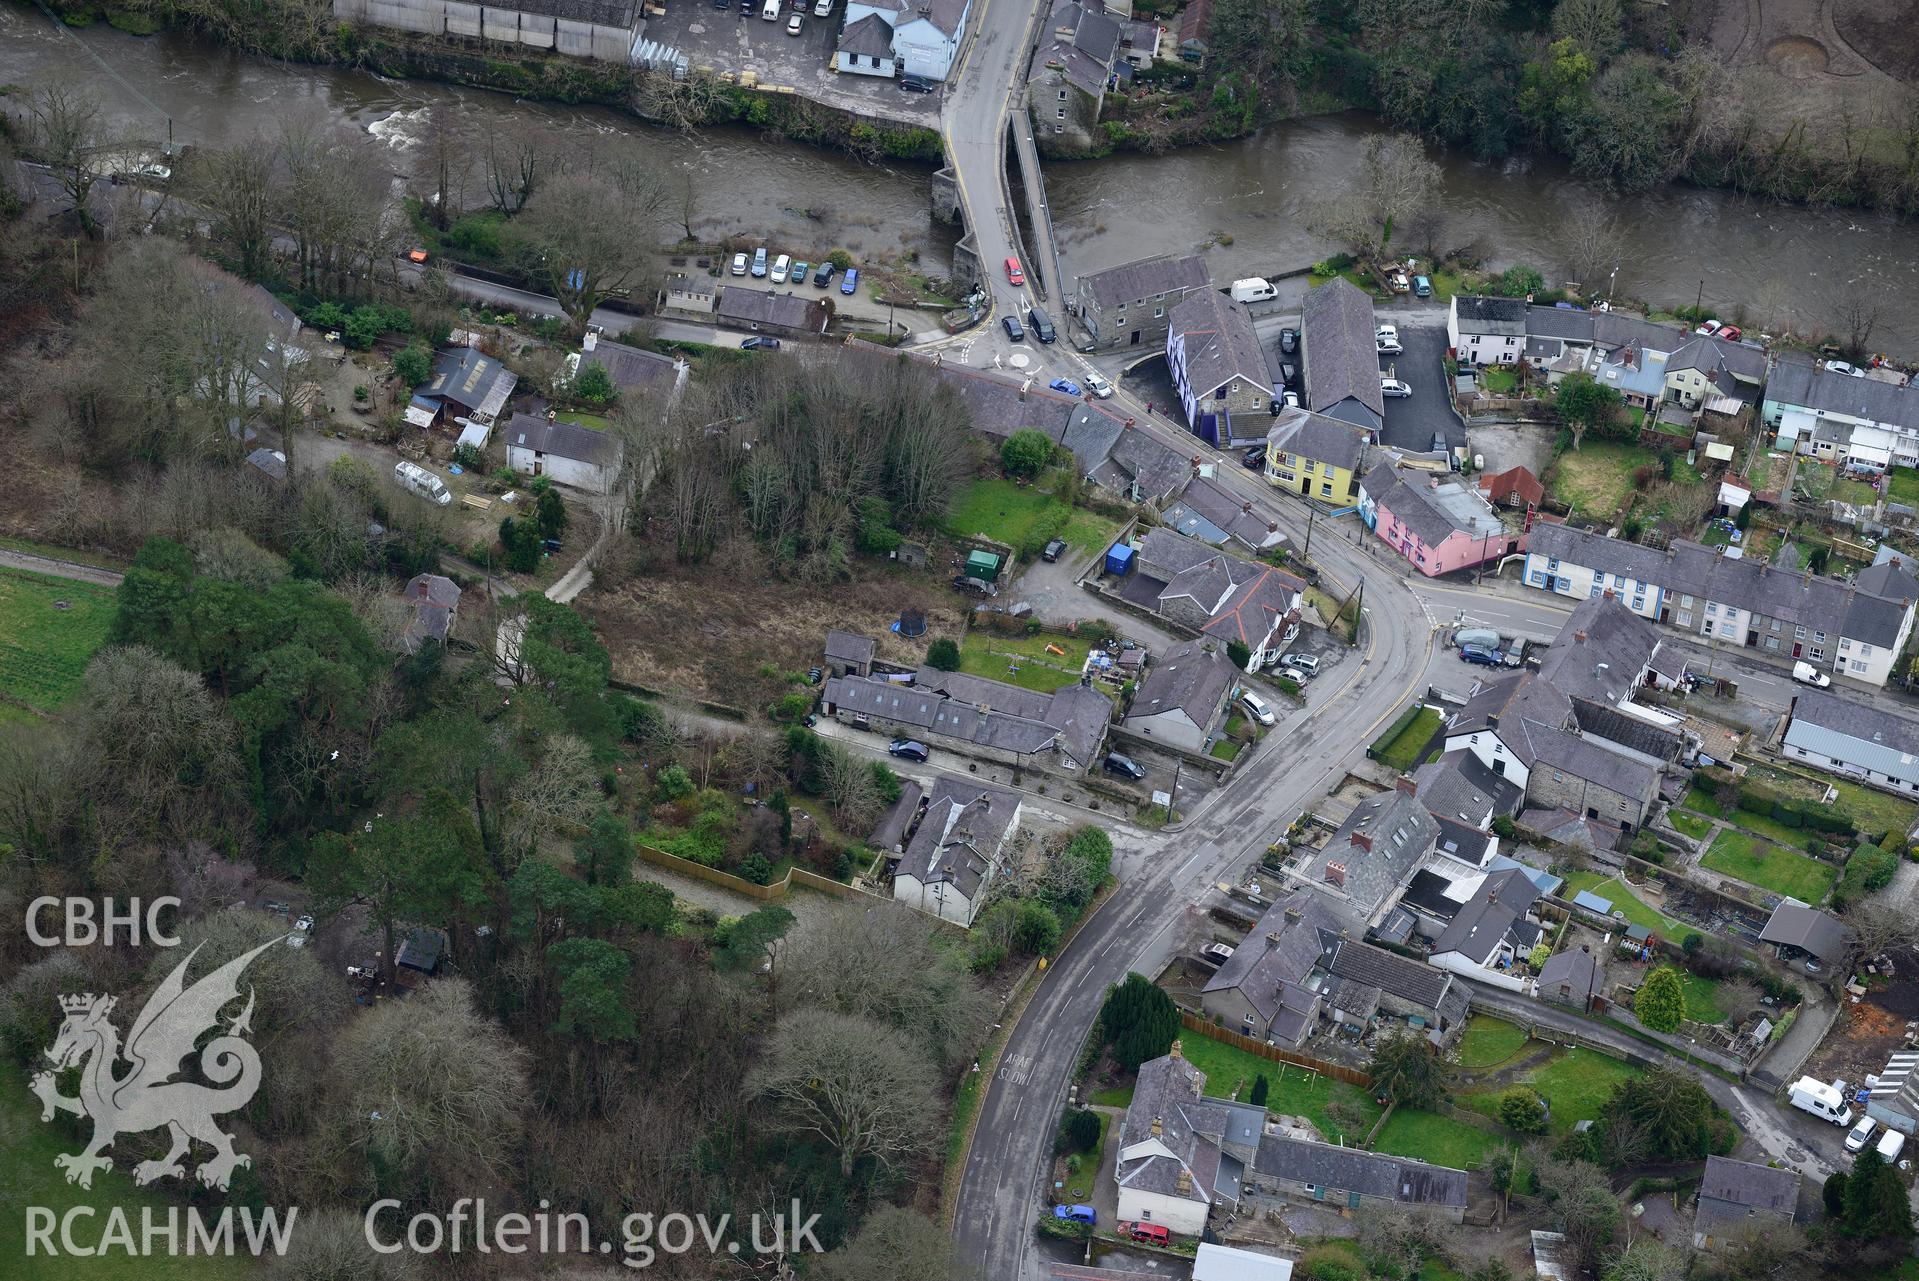 Adpar motte and Newcastle Emlyn Bridge, Newcastle Emlyn. Oblique aerial photograph taken during the Royal Commission's programme of archaeological aerial reconnaissance by Toby Driver on 13th March 2015.